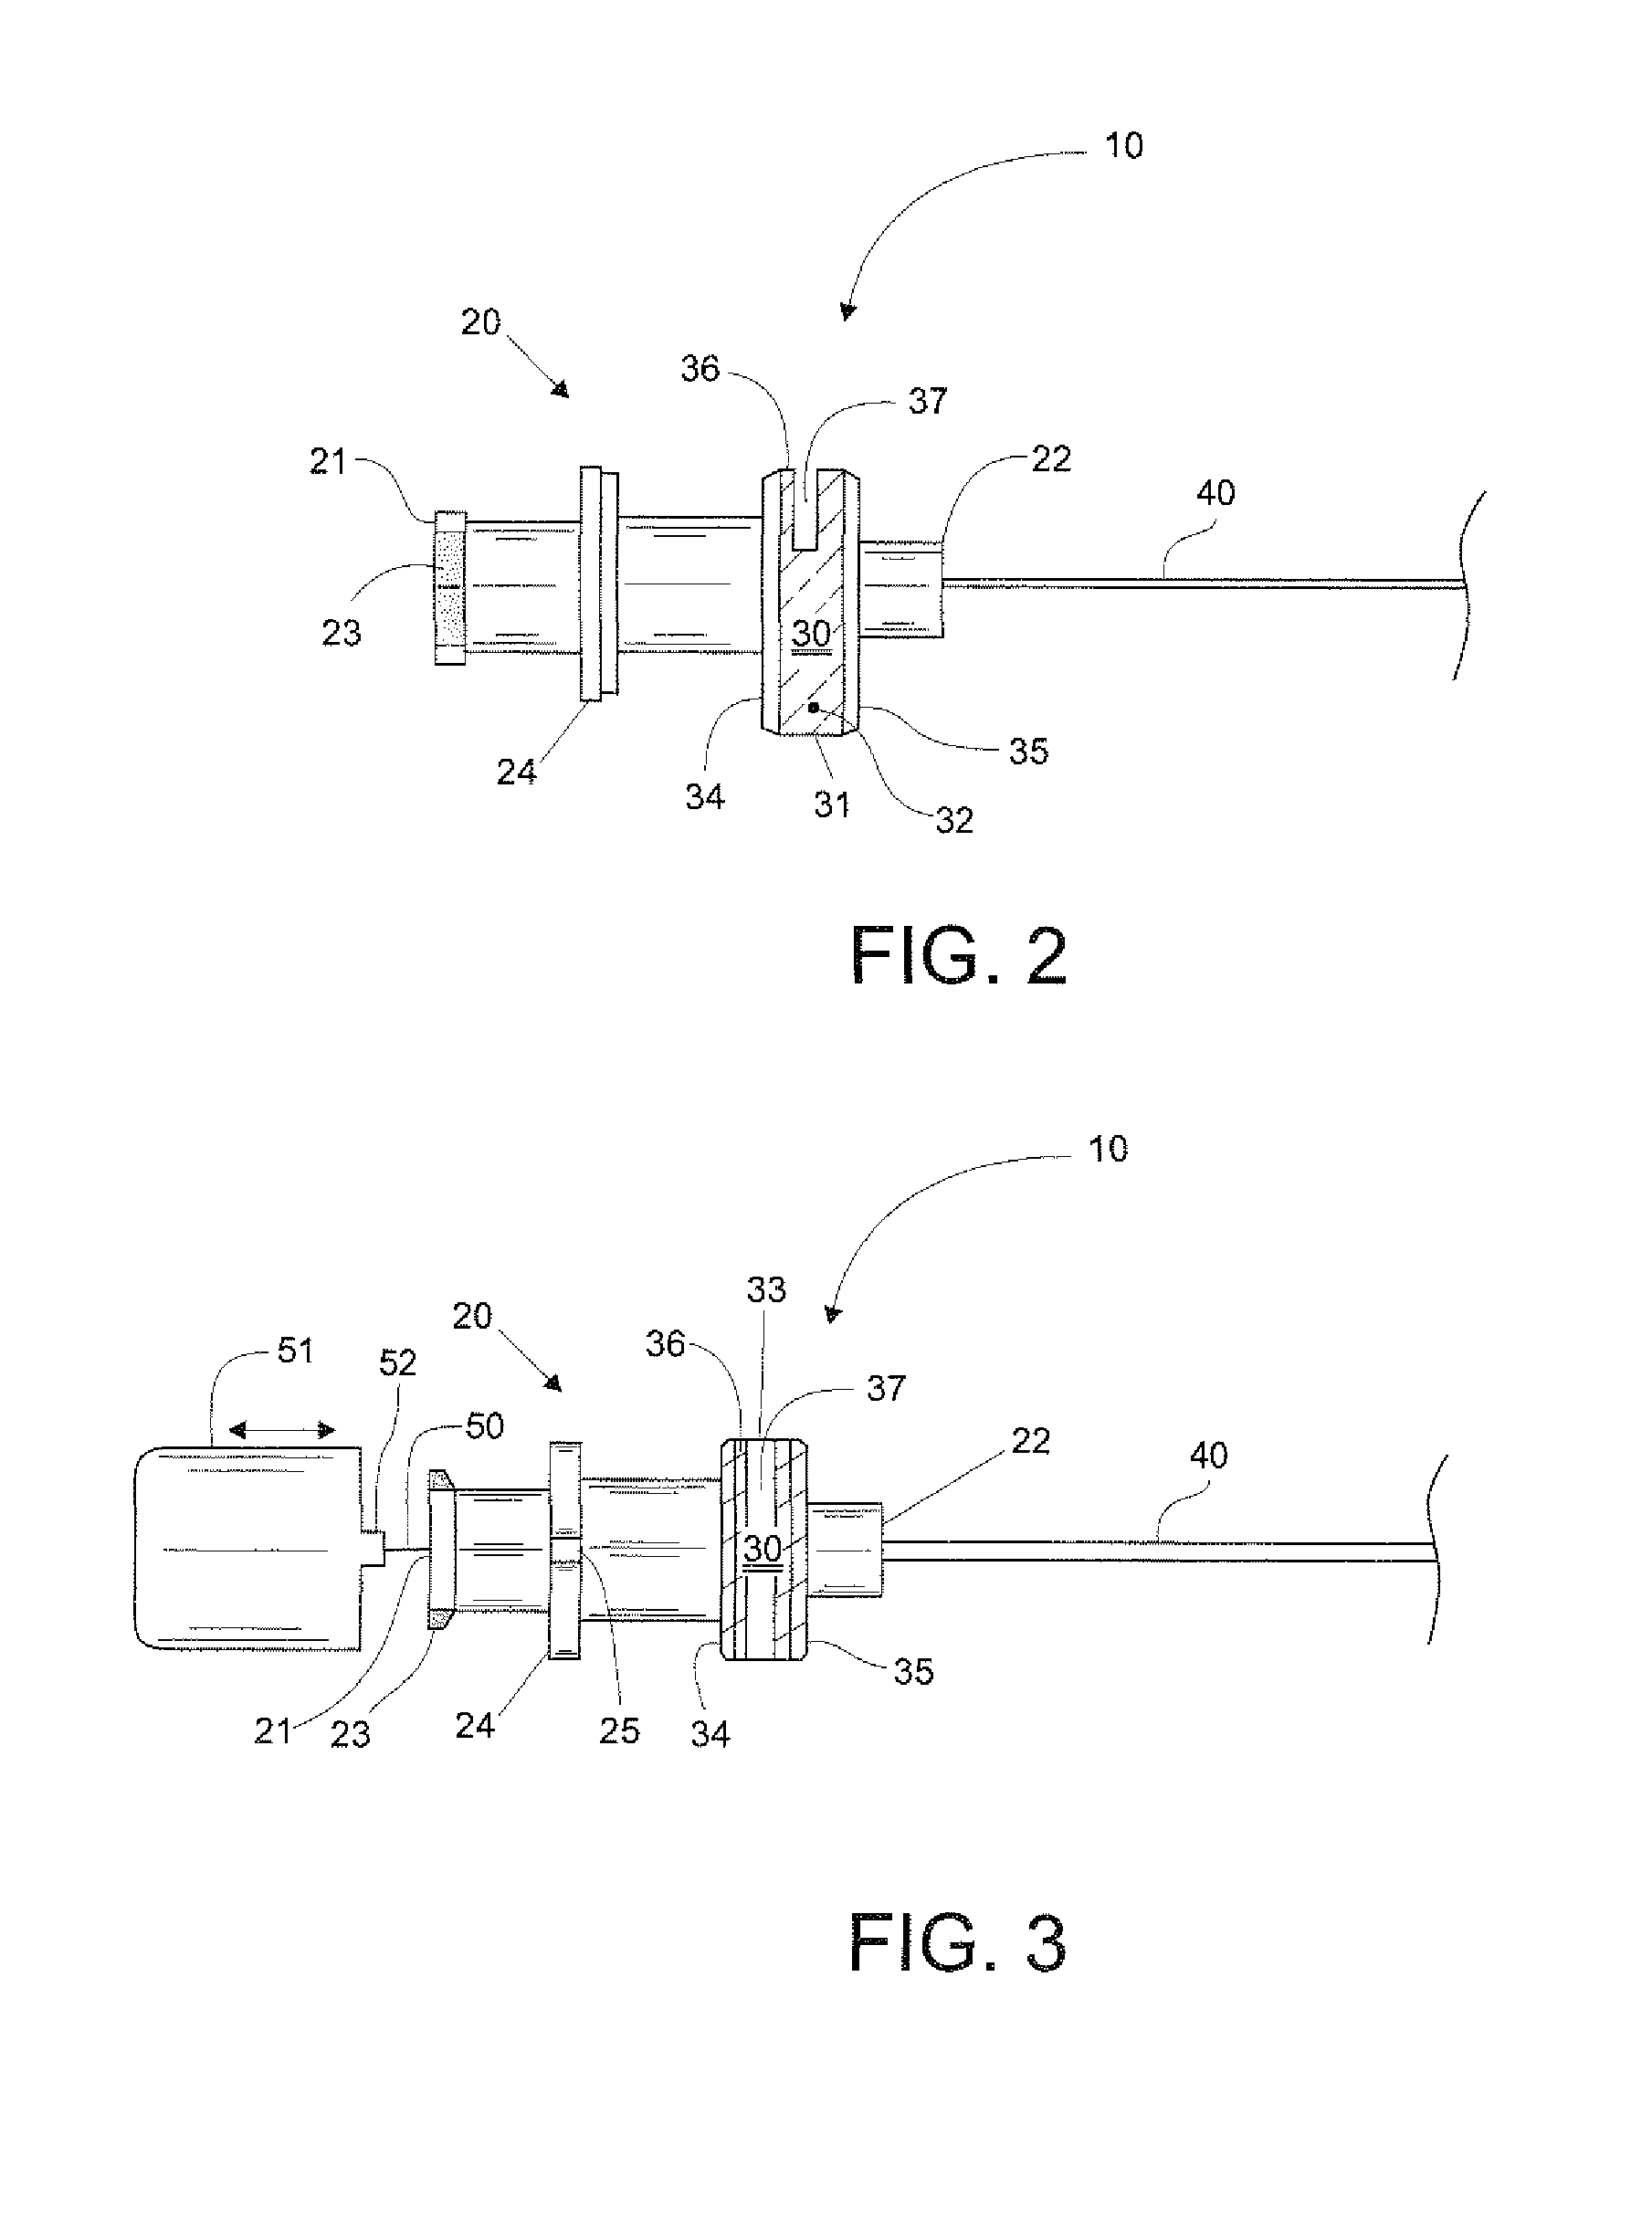 Spinal needle including a chamber for identifying cerebrospinal fluid